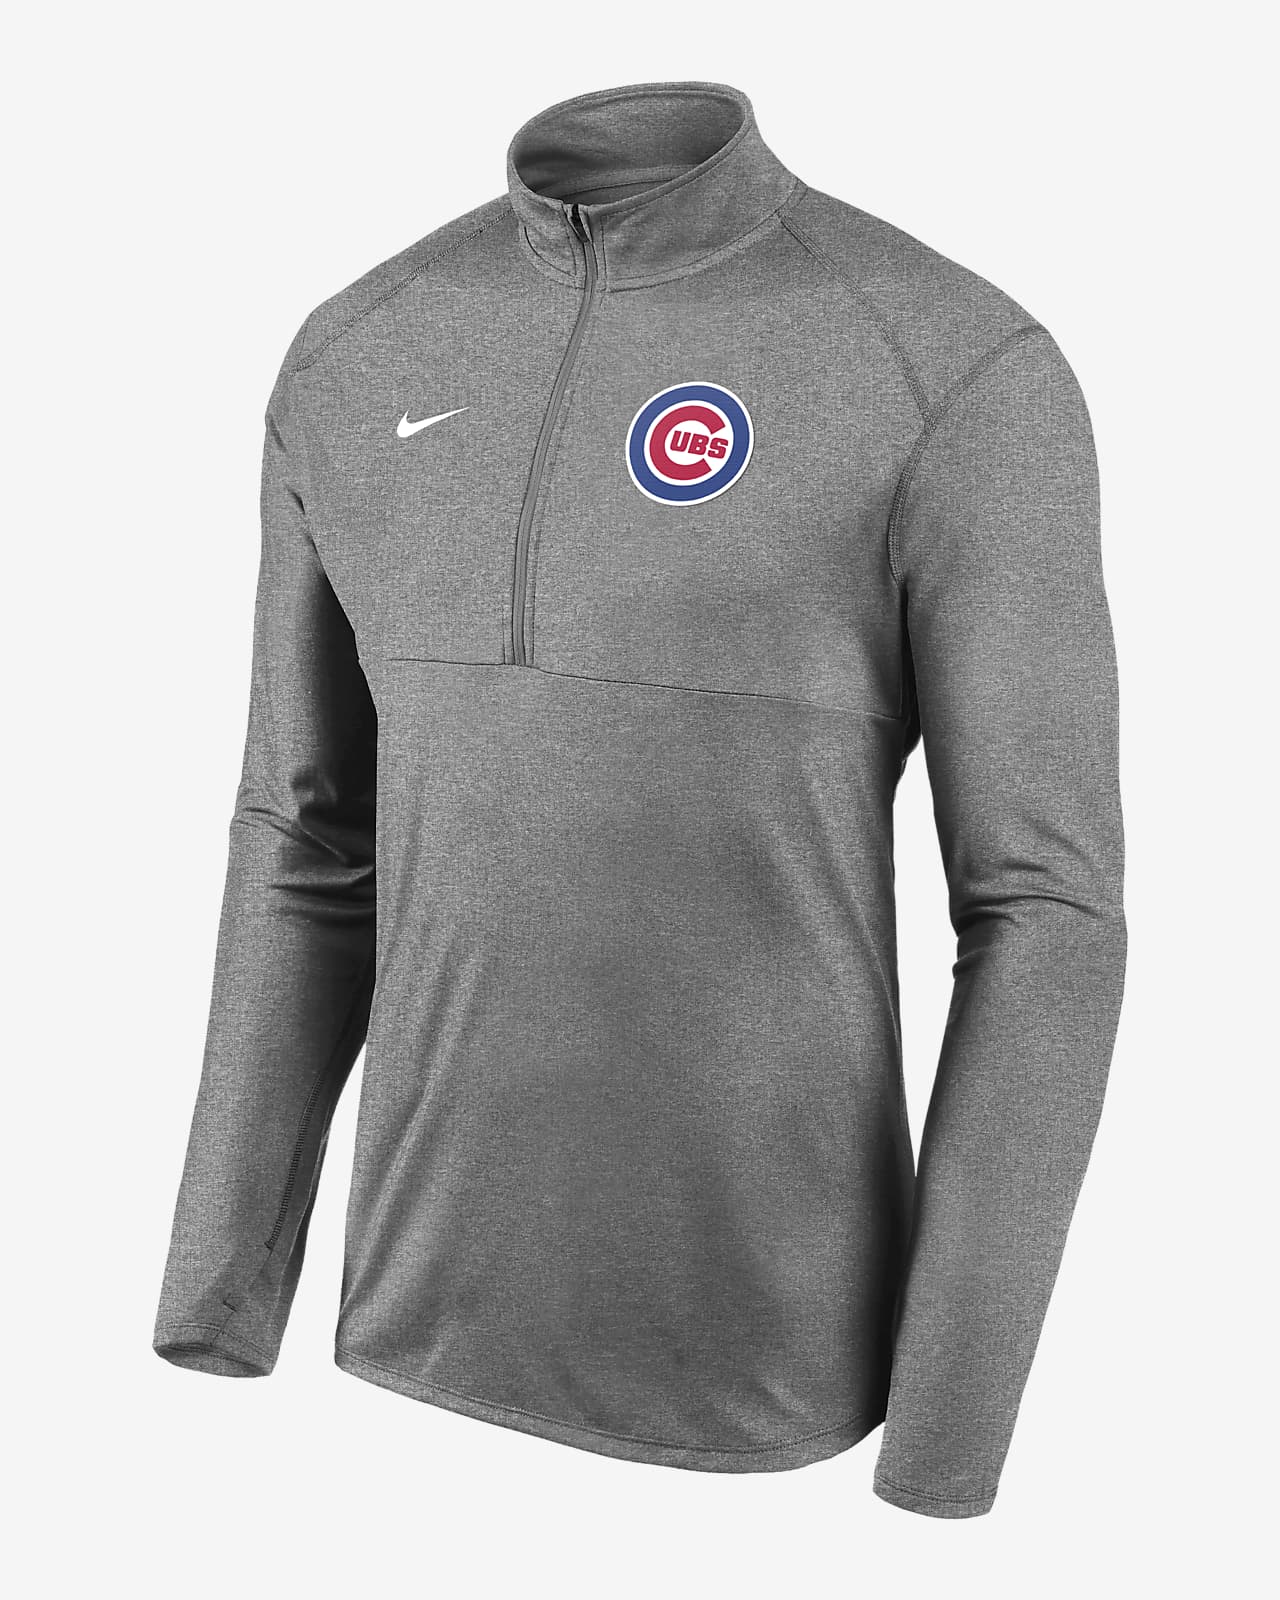 Nike Dri-FIT Early Work (MLB Chicago Cubs) Men's Pullover Hoodie